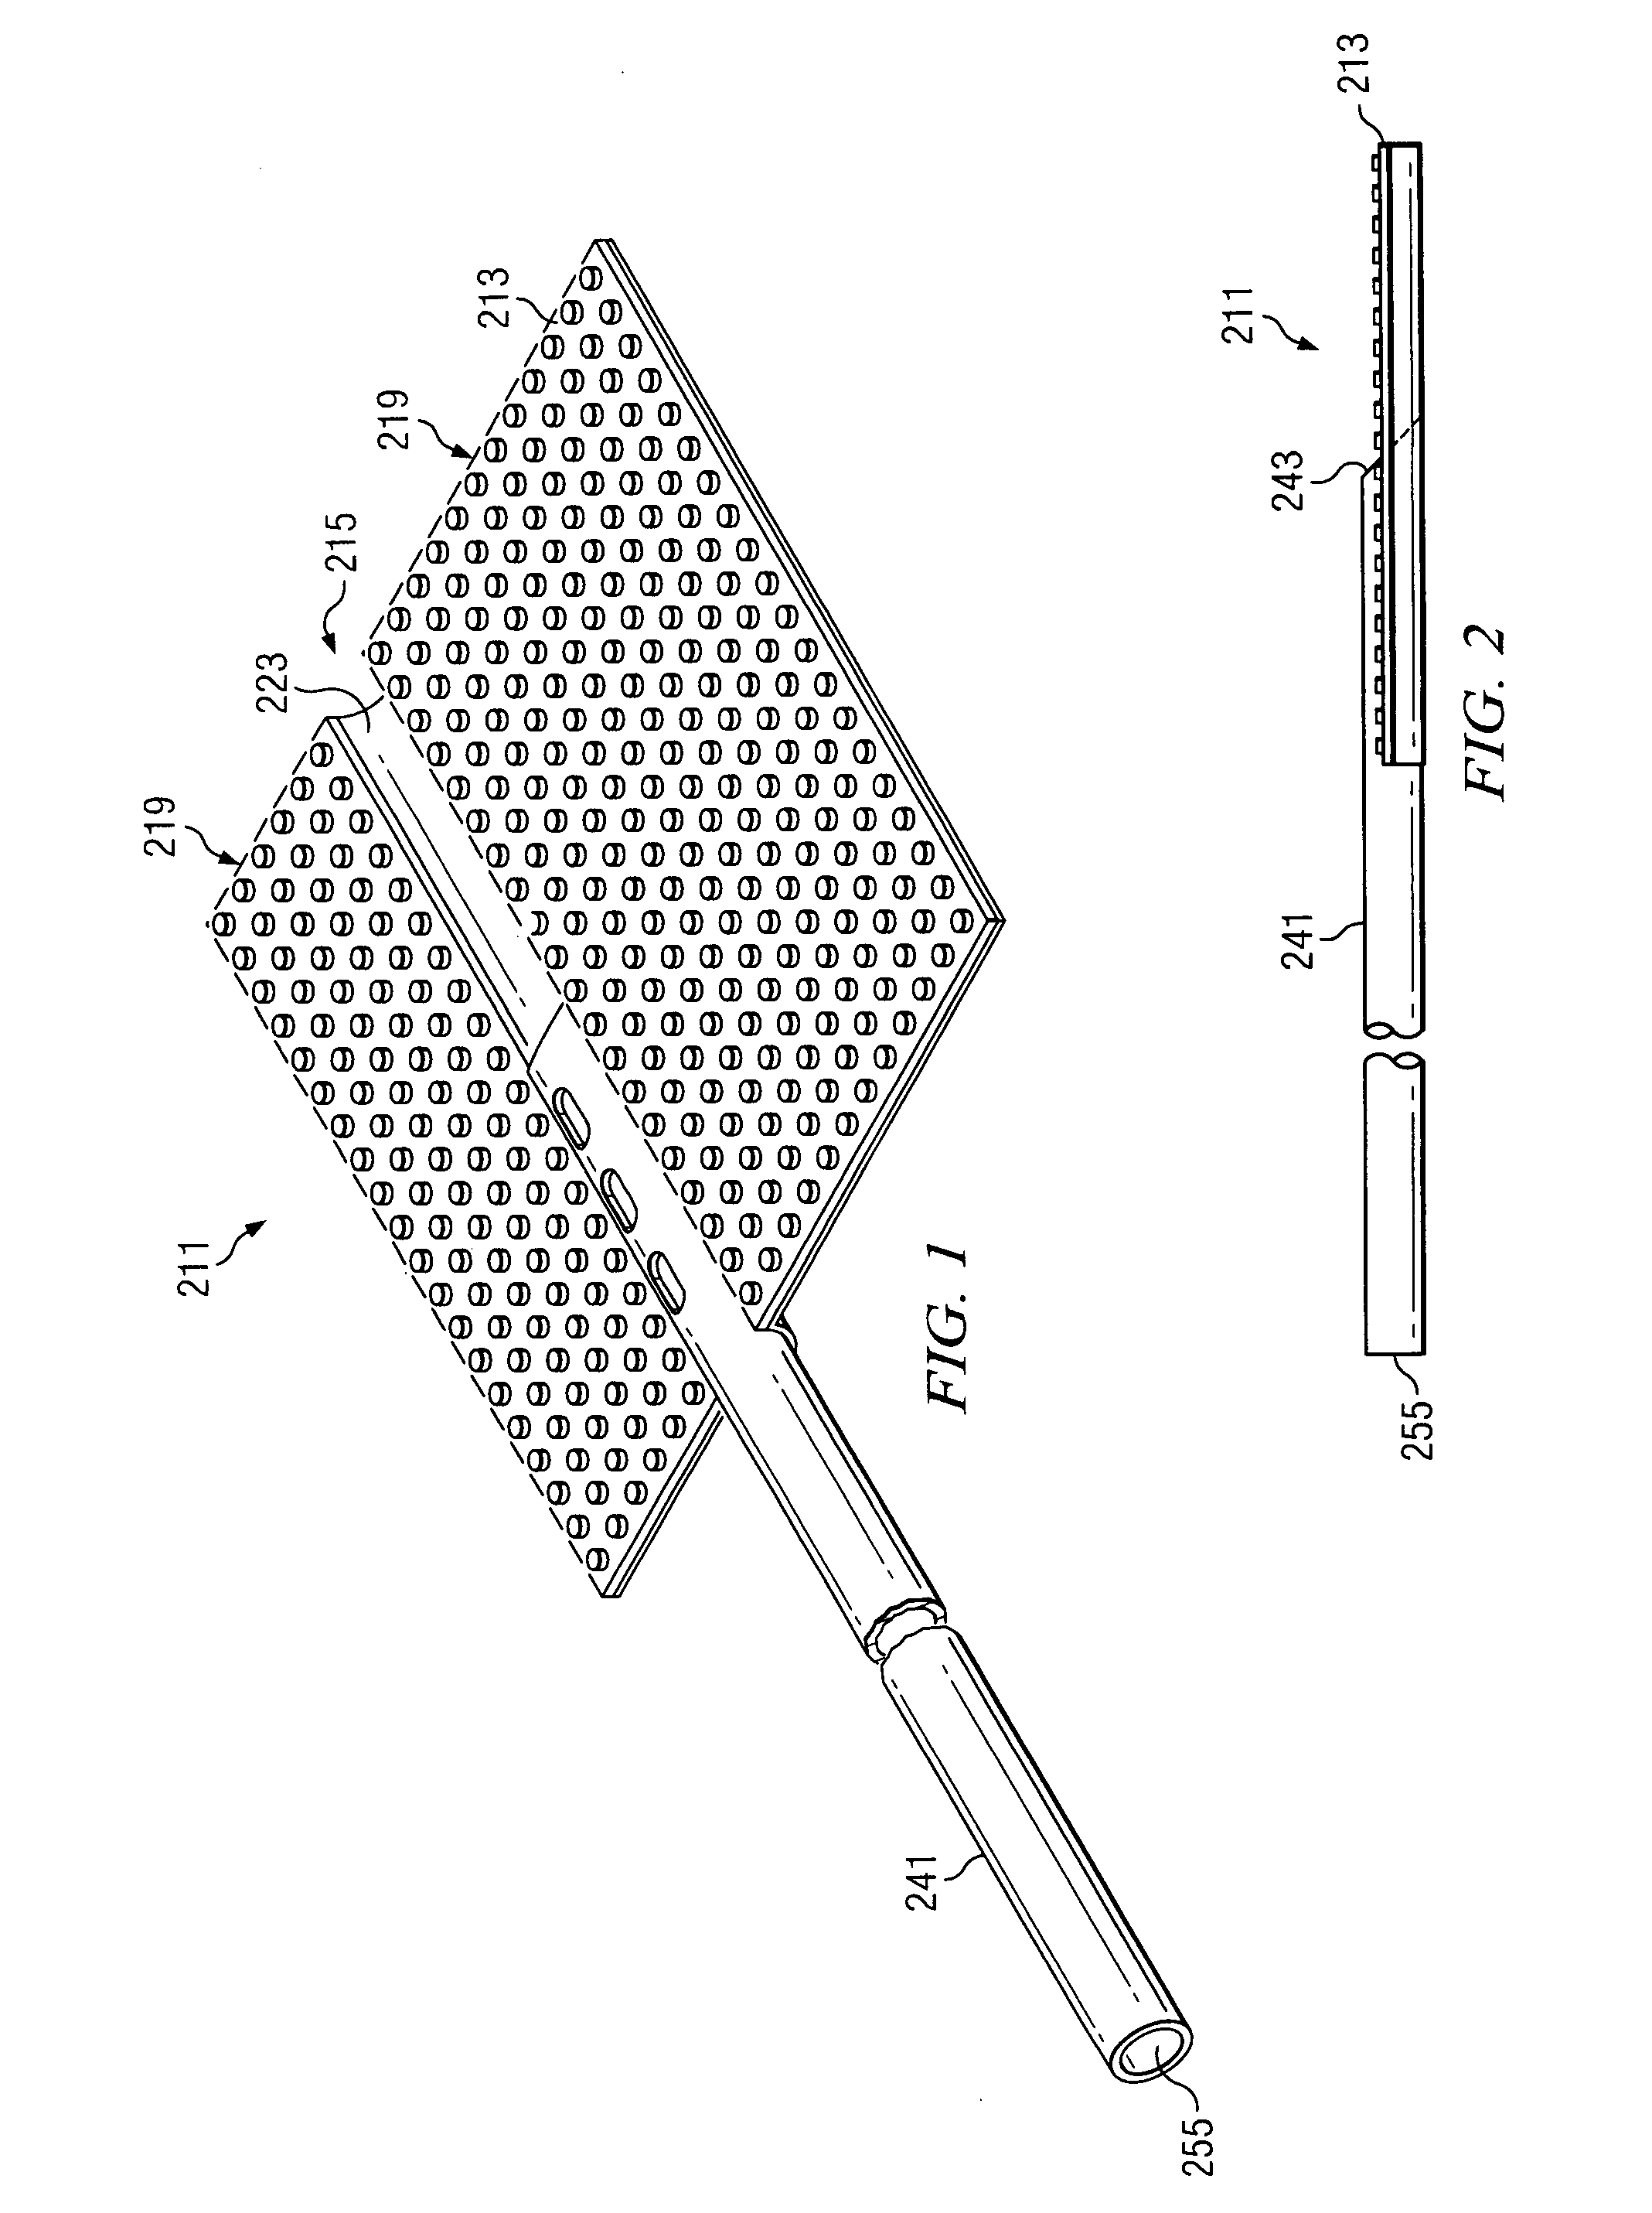 System and method for percutaneously administering reduced pressure treatment using a flowable manifold